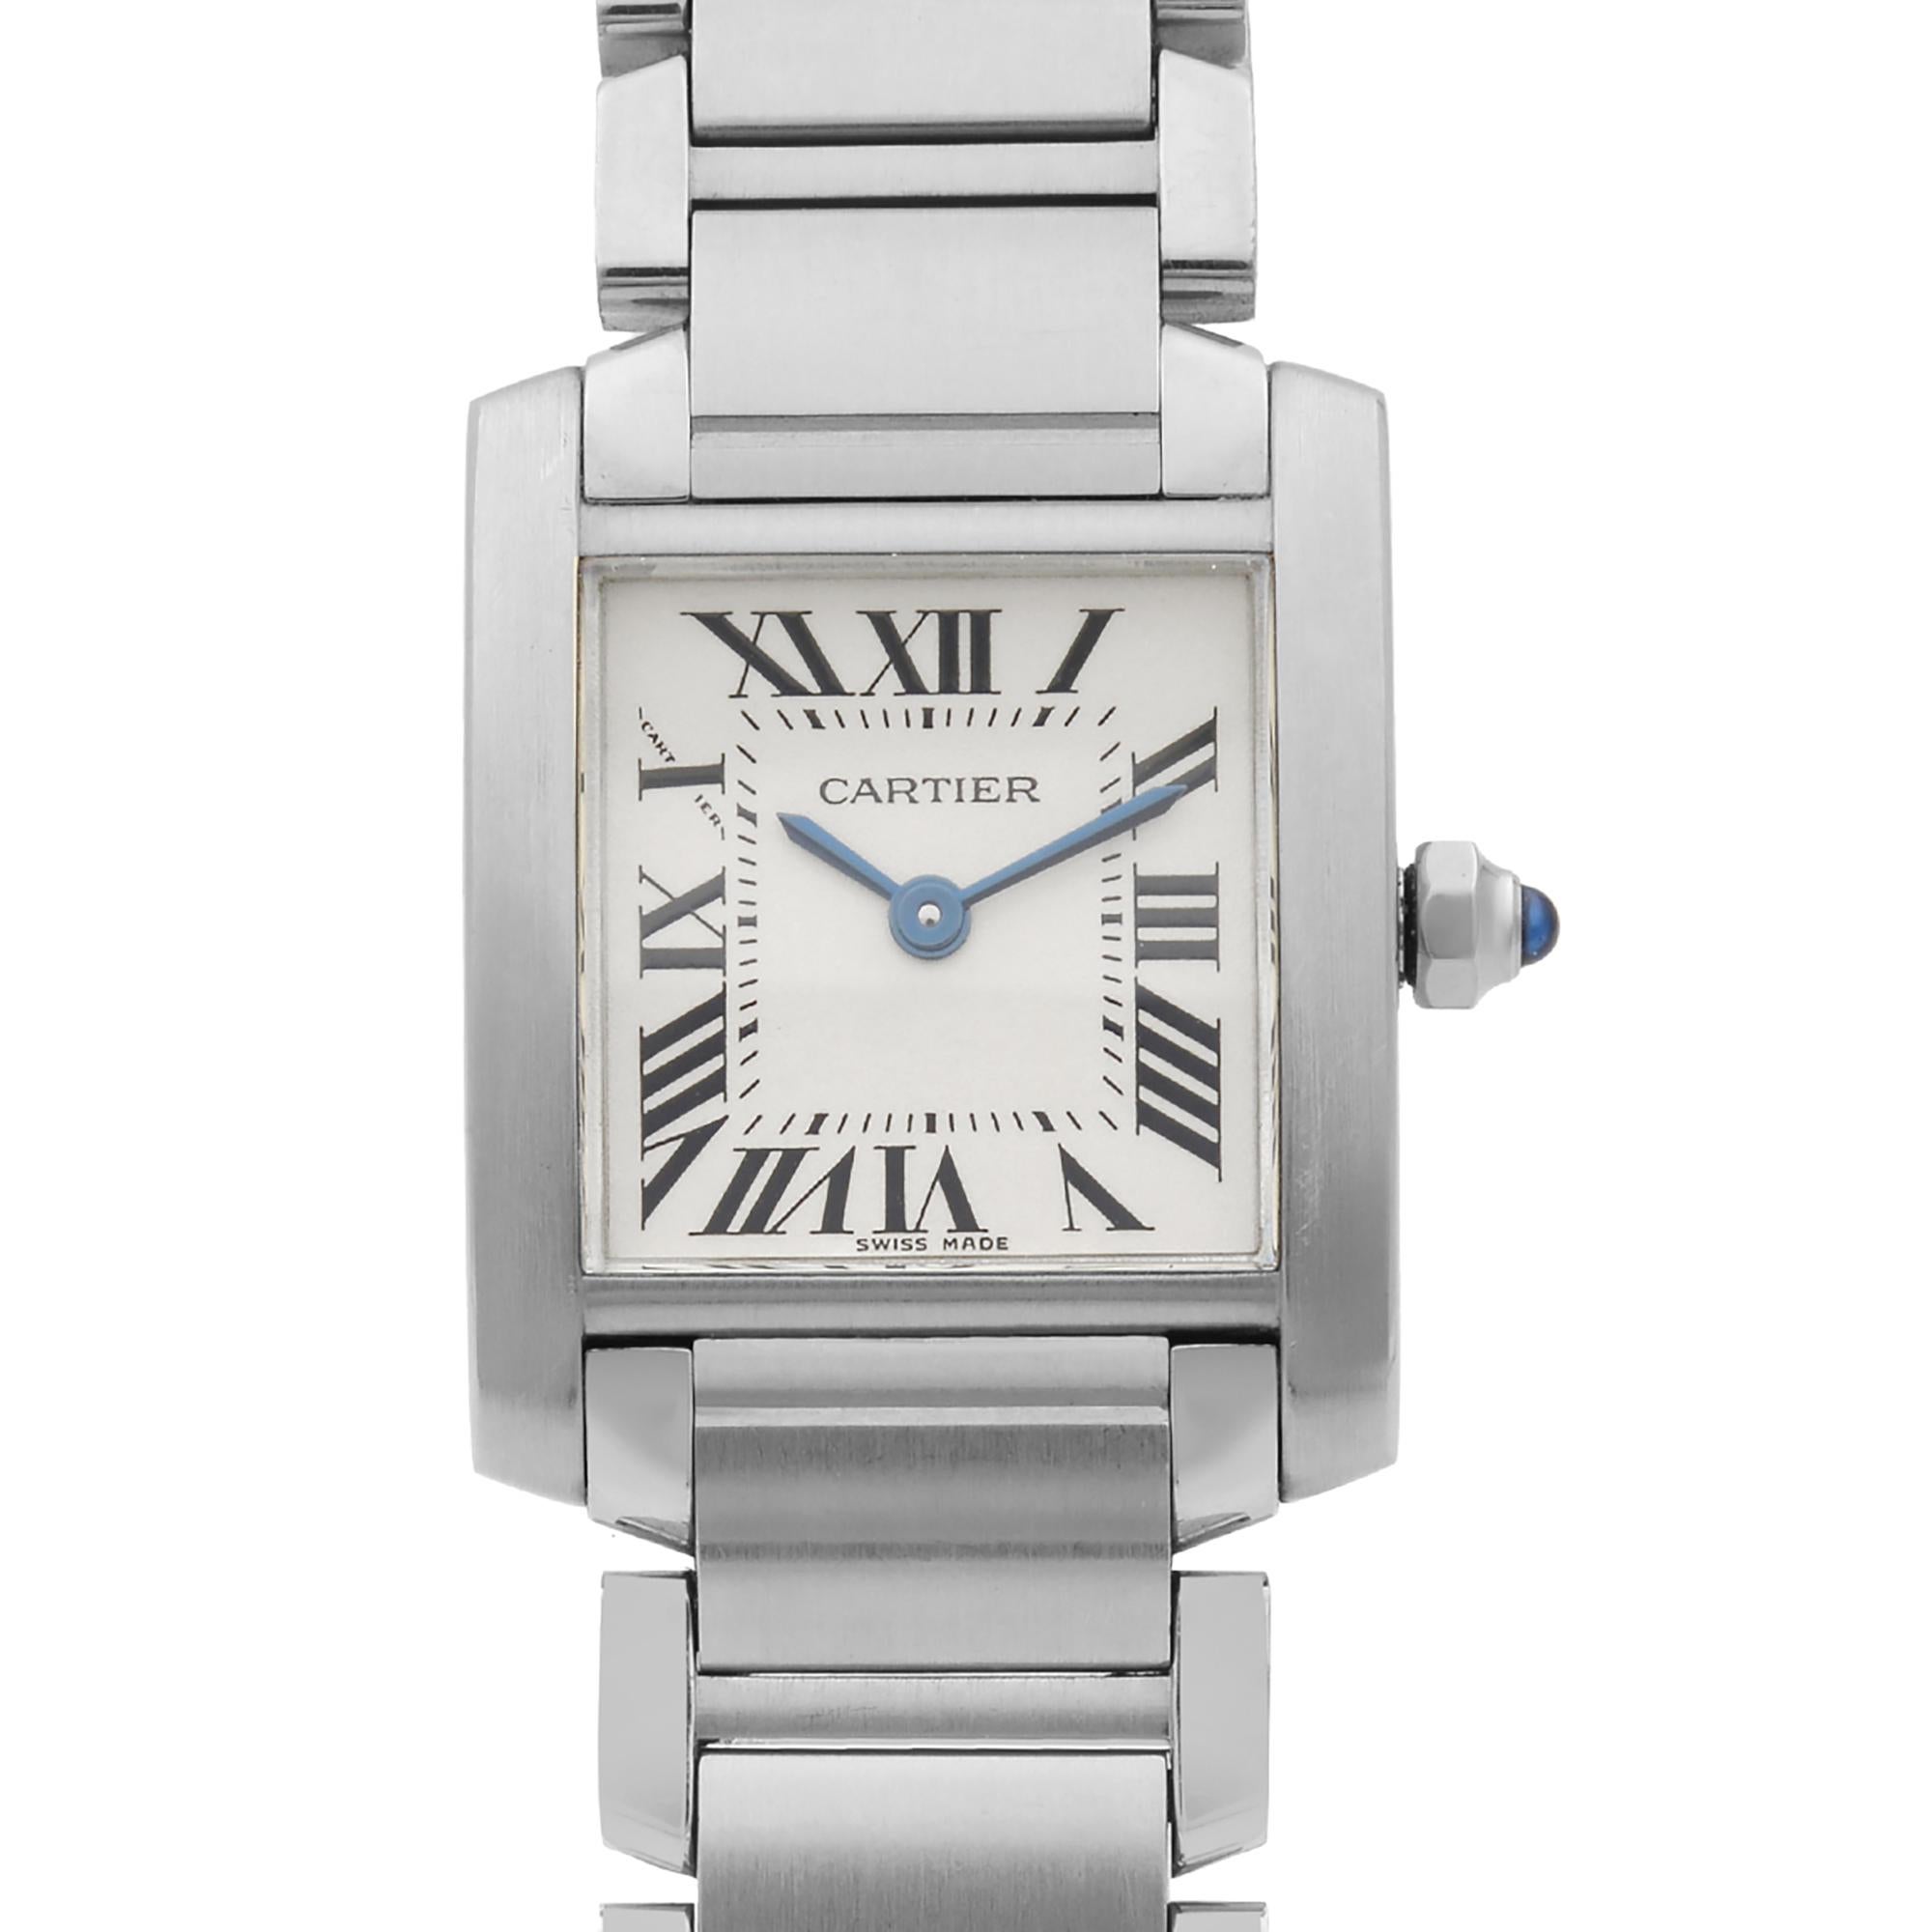 Pre Owned Cartier Tank Francaise Stainless Steel White Roman Dial Ladies Watch W51008Q3. This Beautiful Timepiece is Powered by Quartz (Battery) Movement And Features: Rectangular Stainless Steel Case & Bracelet, Fixed Stainless Steel Bezel, White